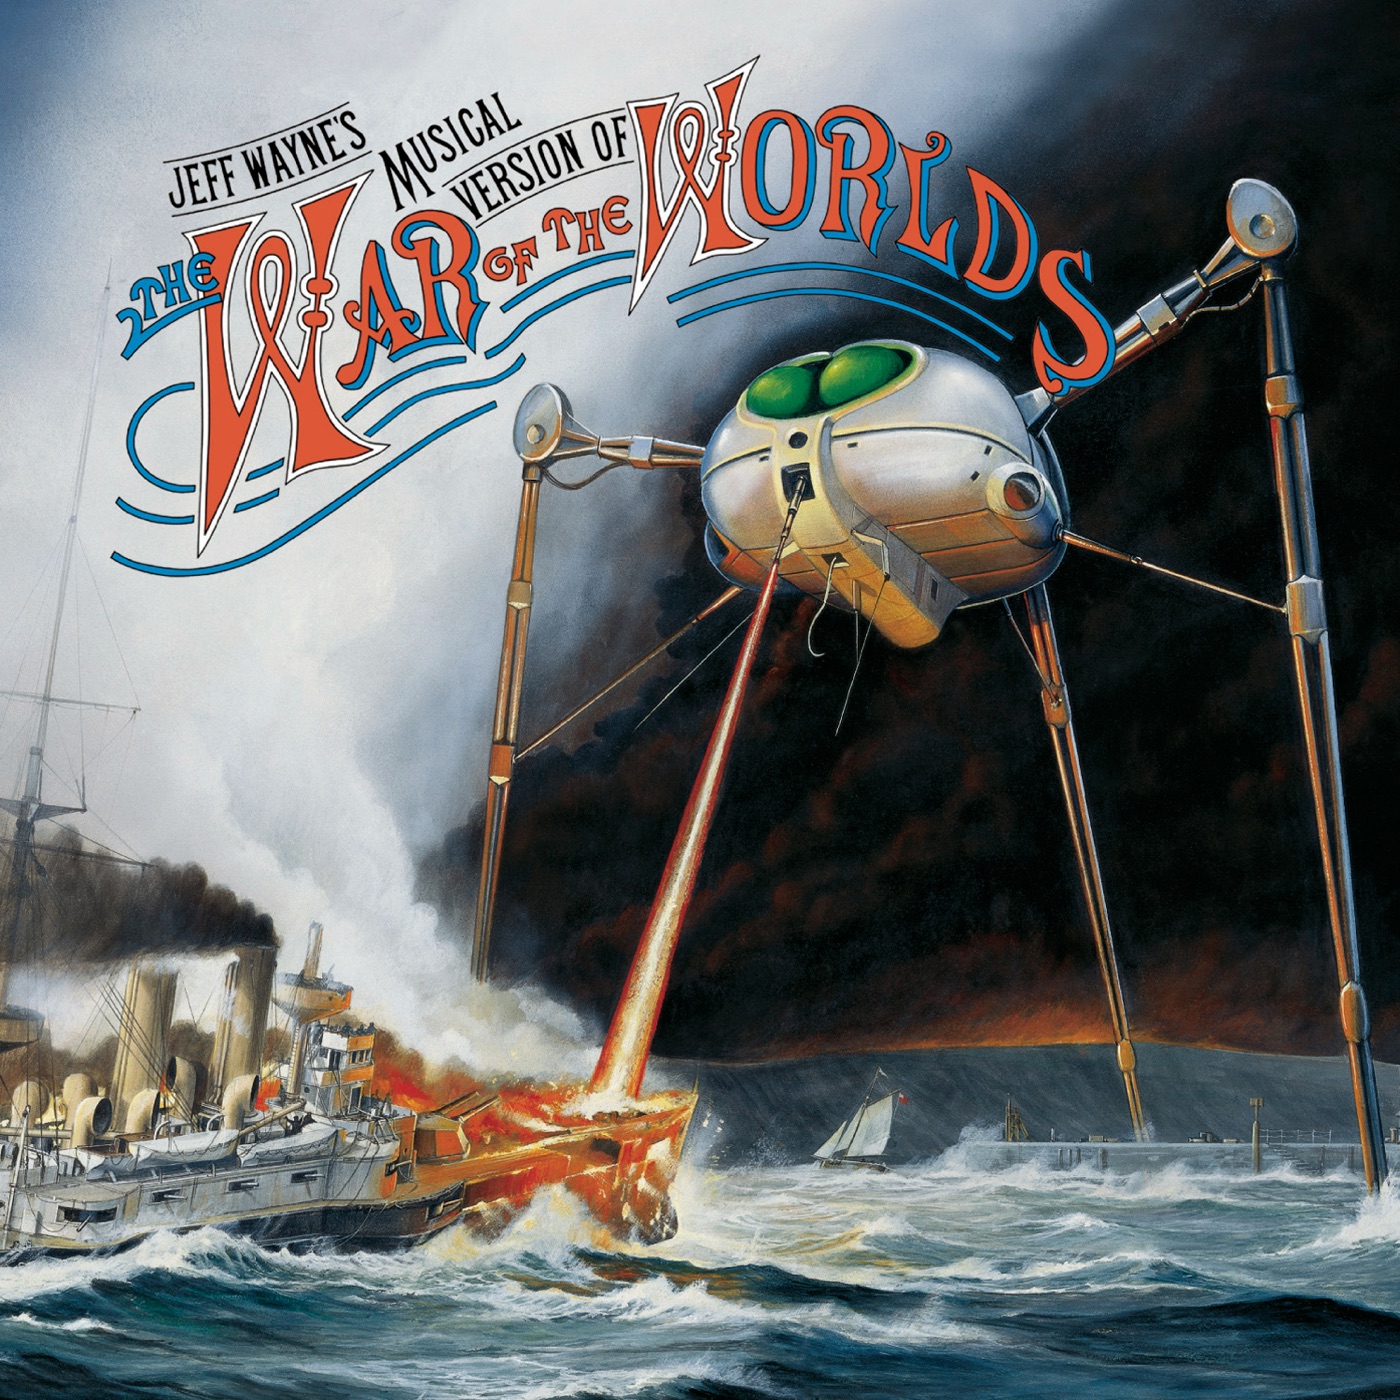 Jeff Wayne's Musical Version of The War of The Worlds by Jeff Wayne